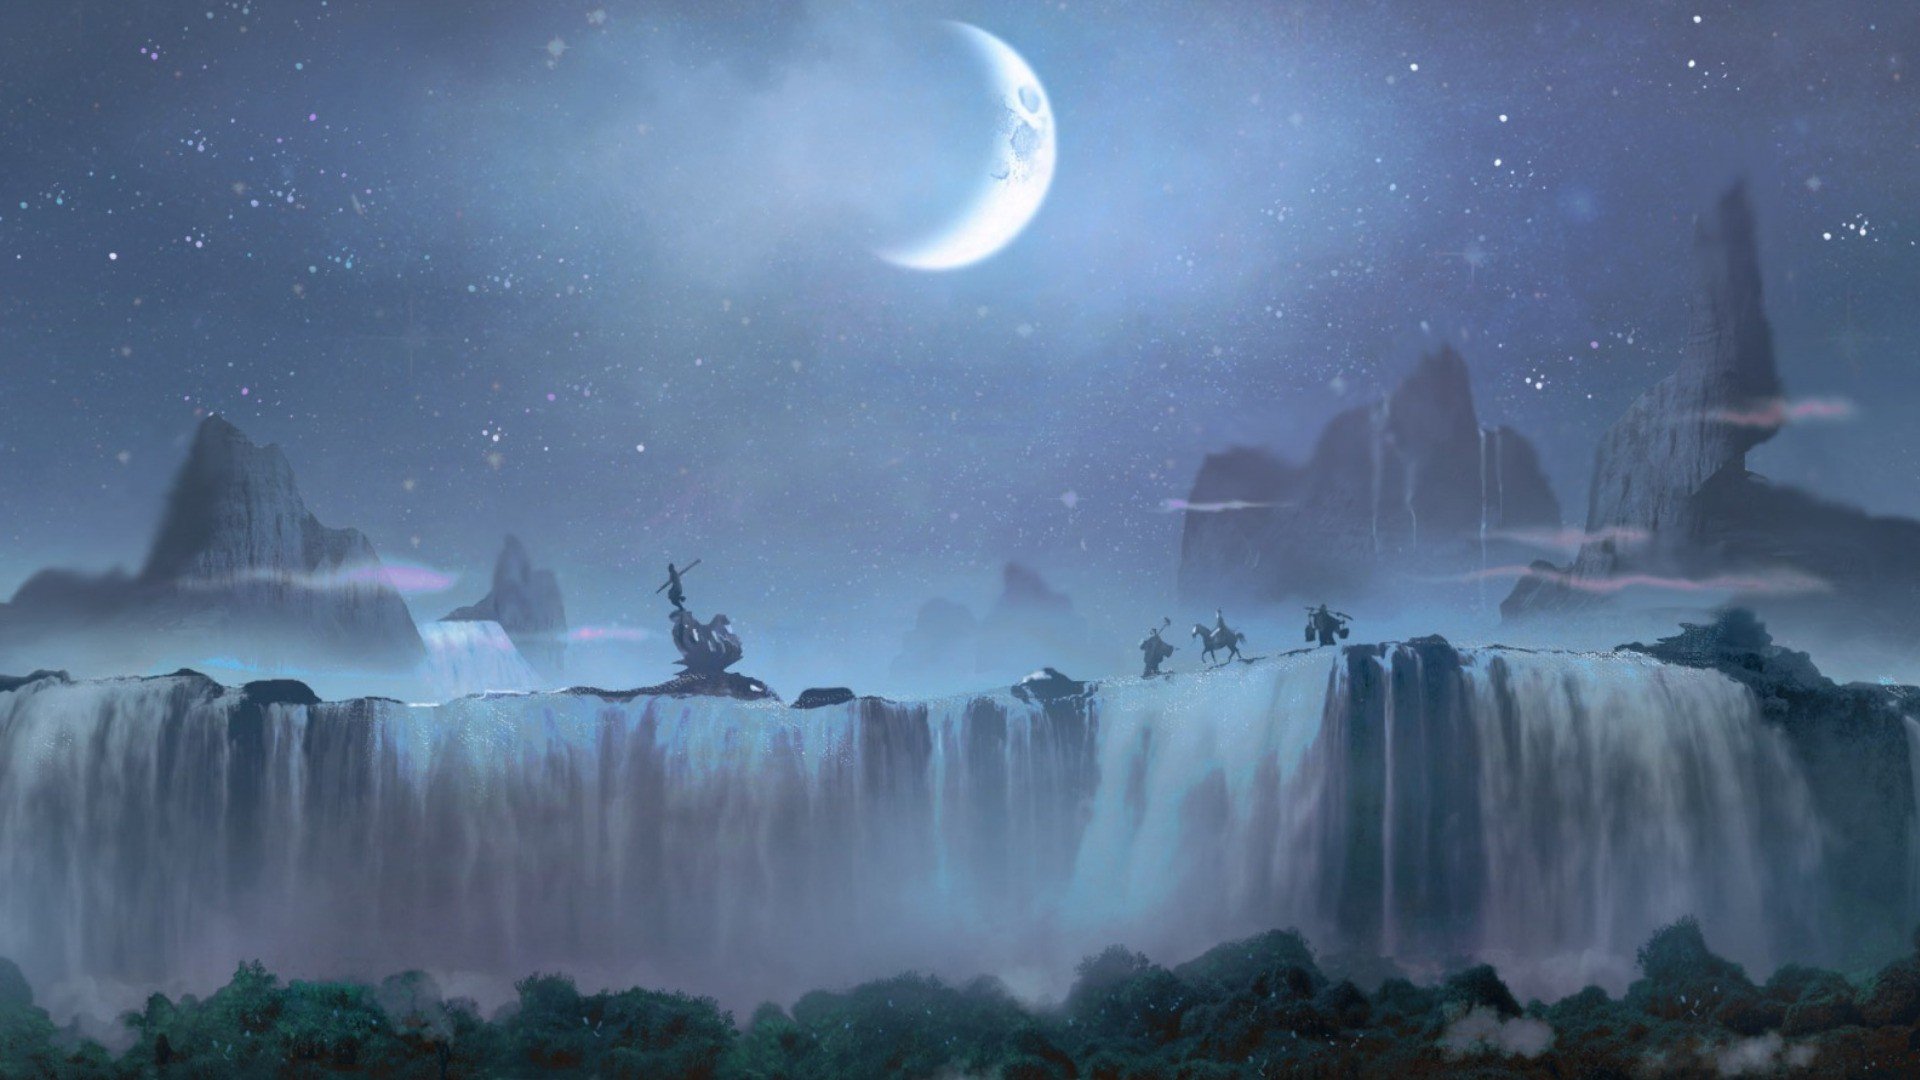 Moon, River, Mountains, Rock formation, Trees, Forest, Waterfall, Fantasy art, Landscape, Clouds, Horse, Digital art Wallpaper